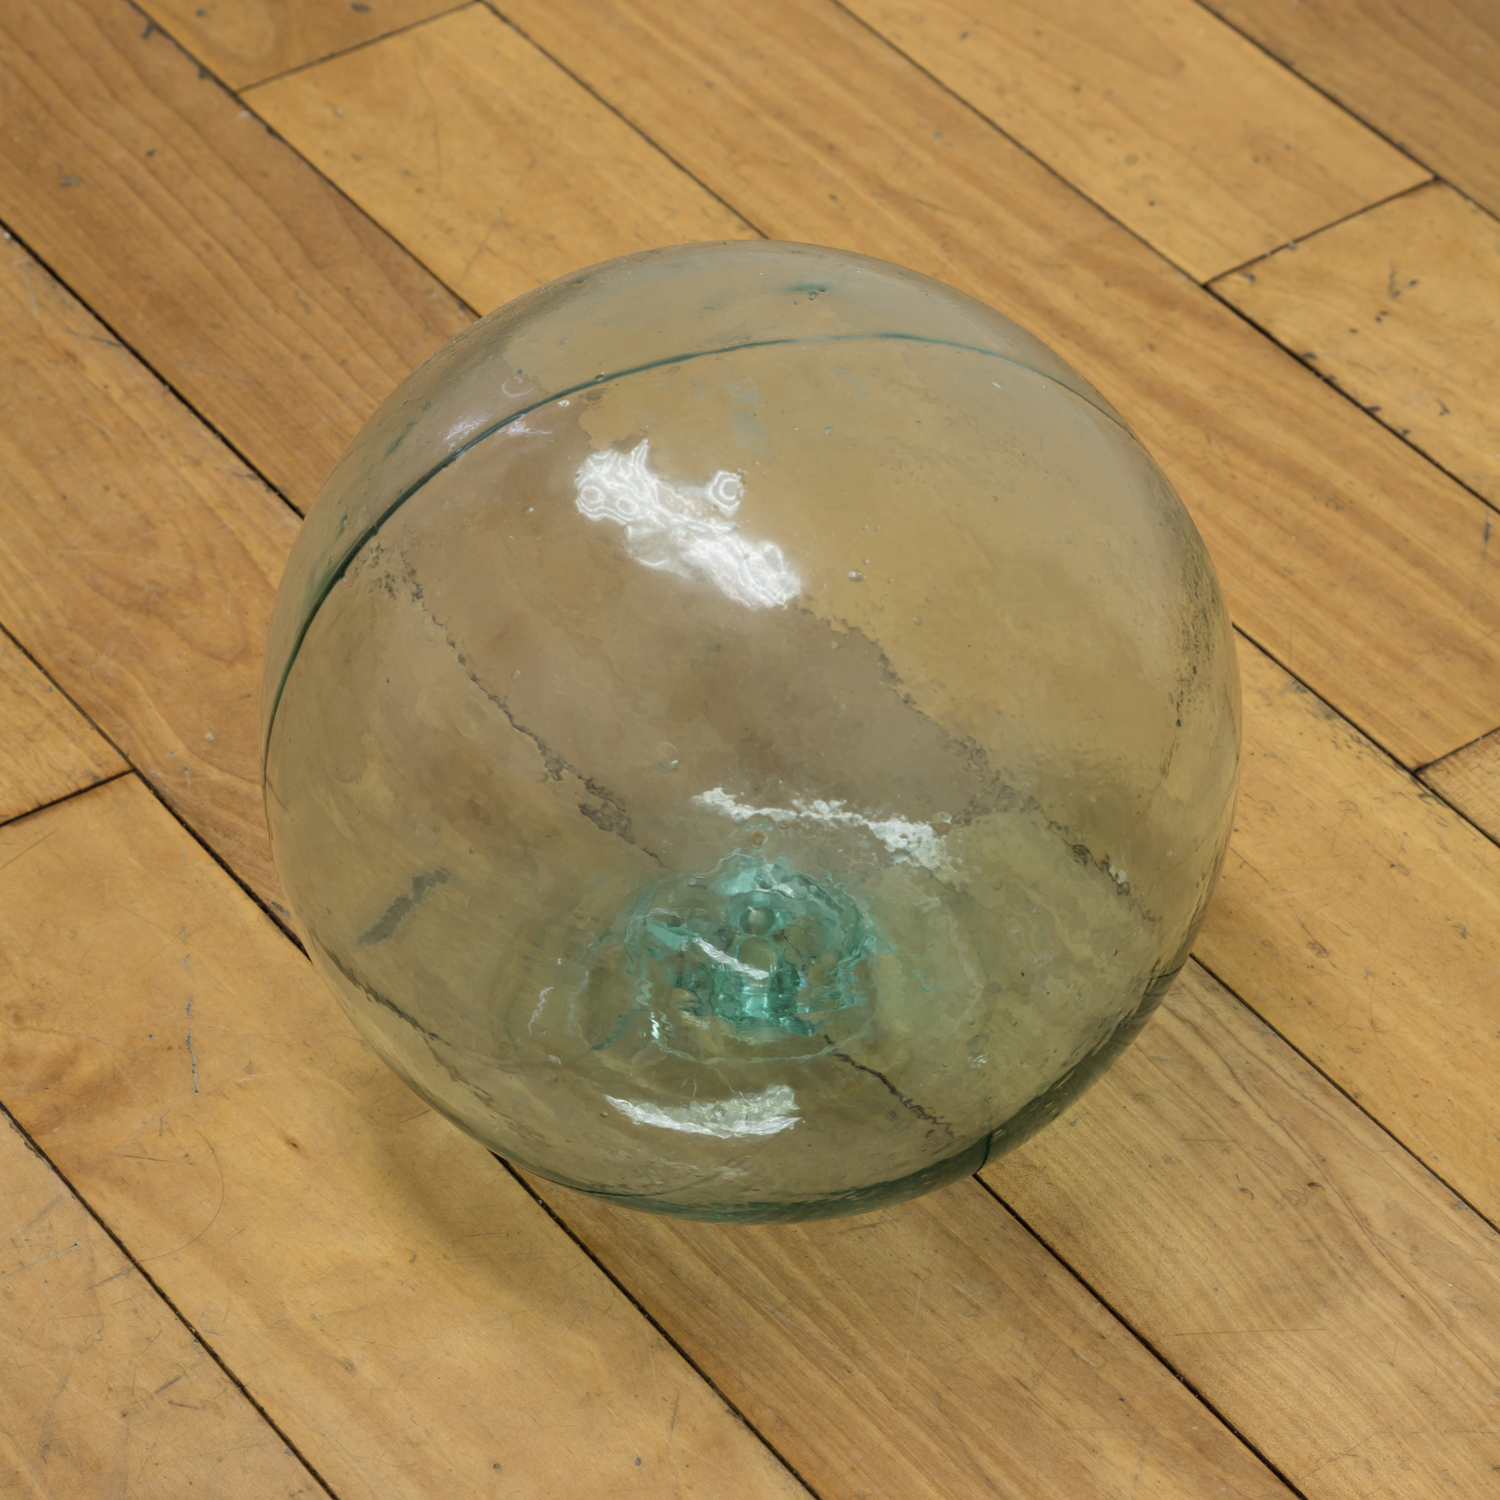  Phoebe Berglund,  Float,  2019. Glass. 9 x 9 x 9 inches. 